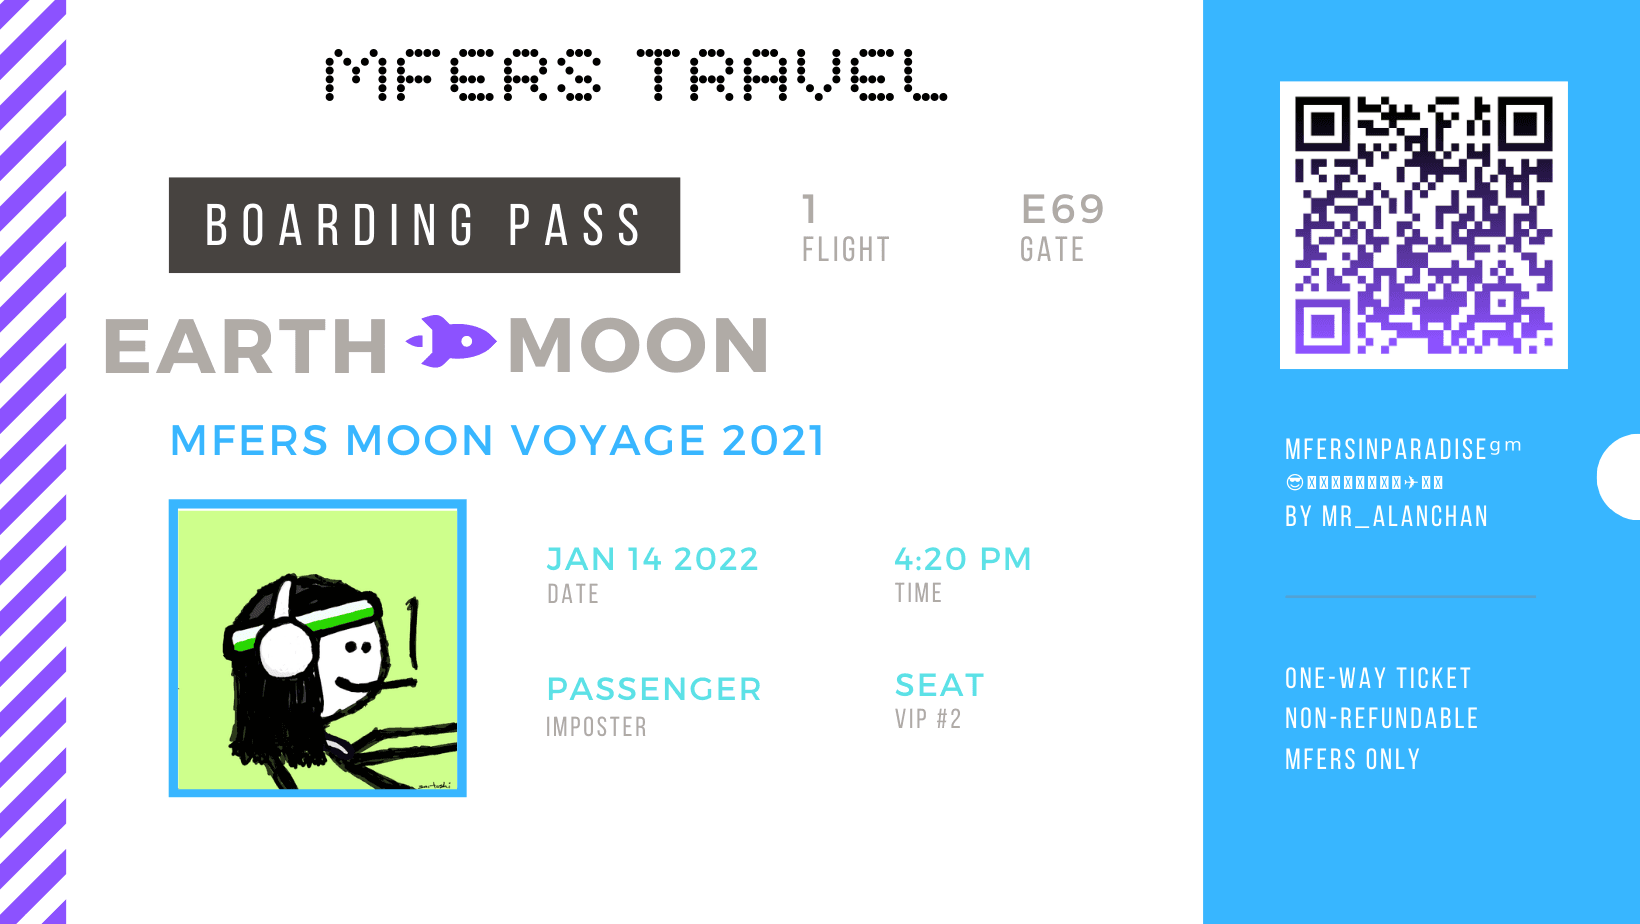 Space Voyage to the moon 2022 - Flight 1 - Vip #2